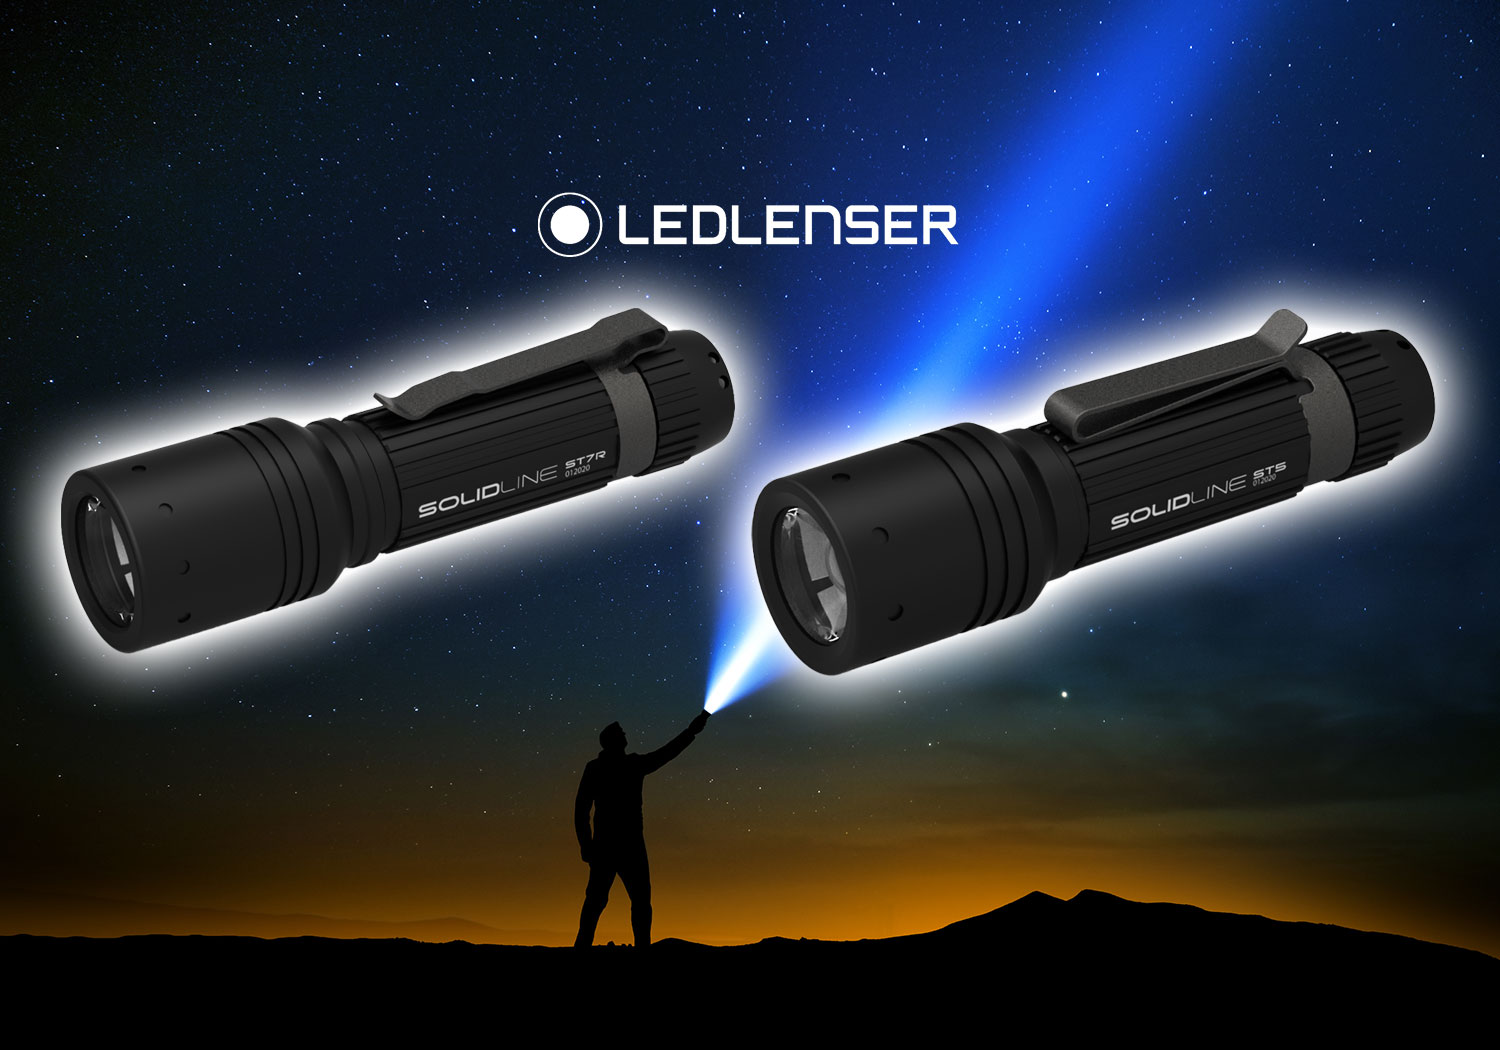 Two new Torches from Ledlenser 